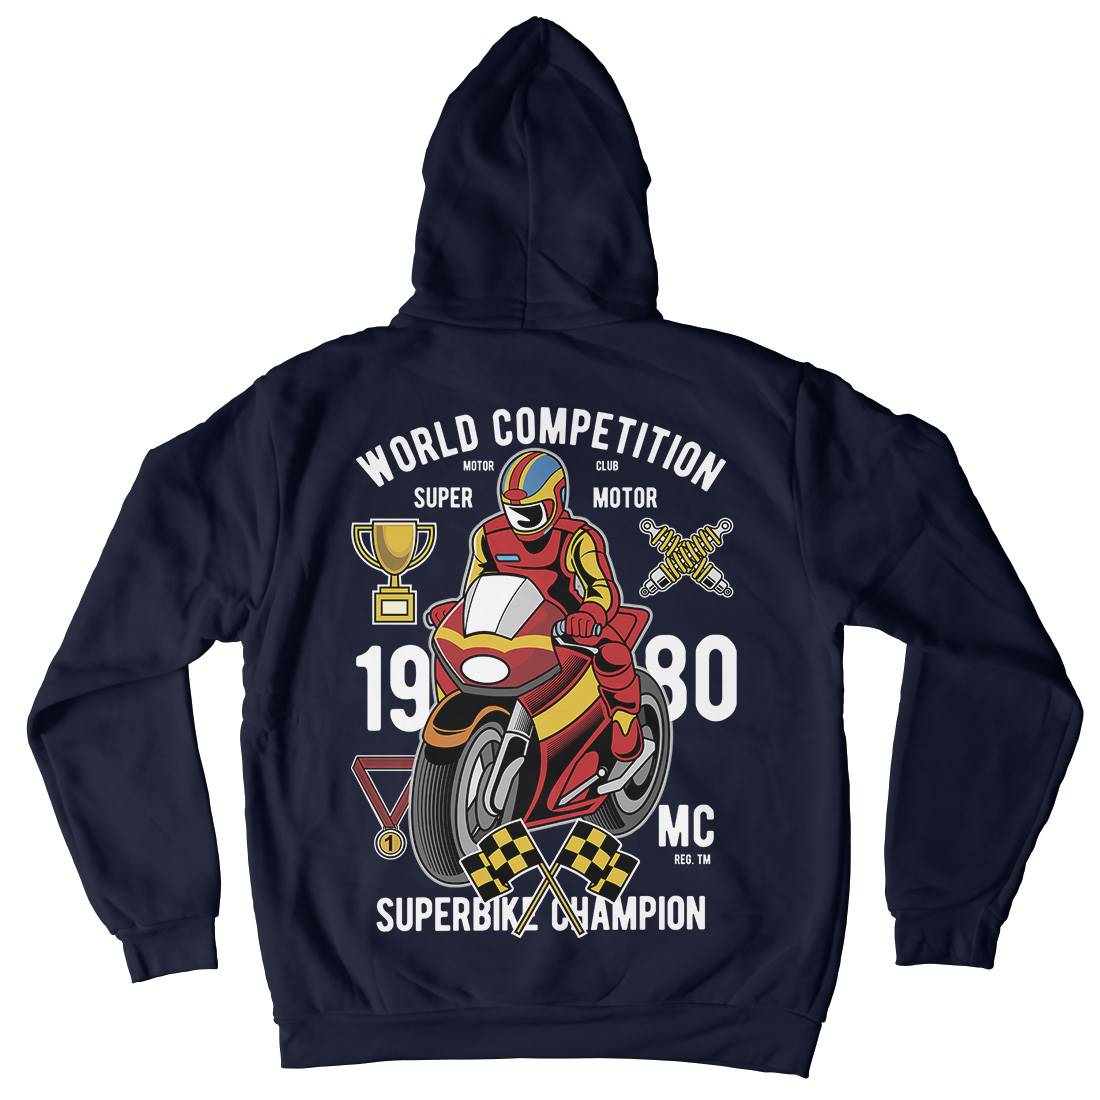 Super Bike World Competition Mens Hoodie With Pocket Motorcycles C458